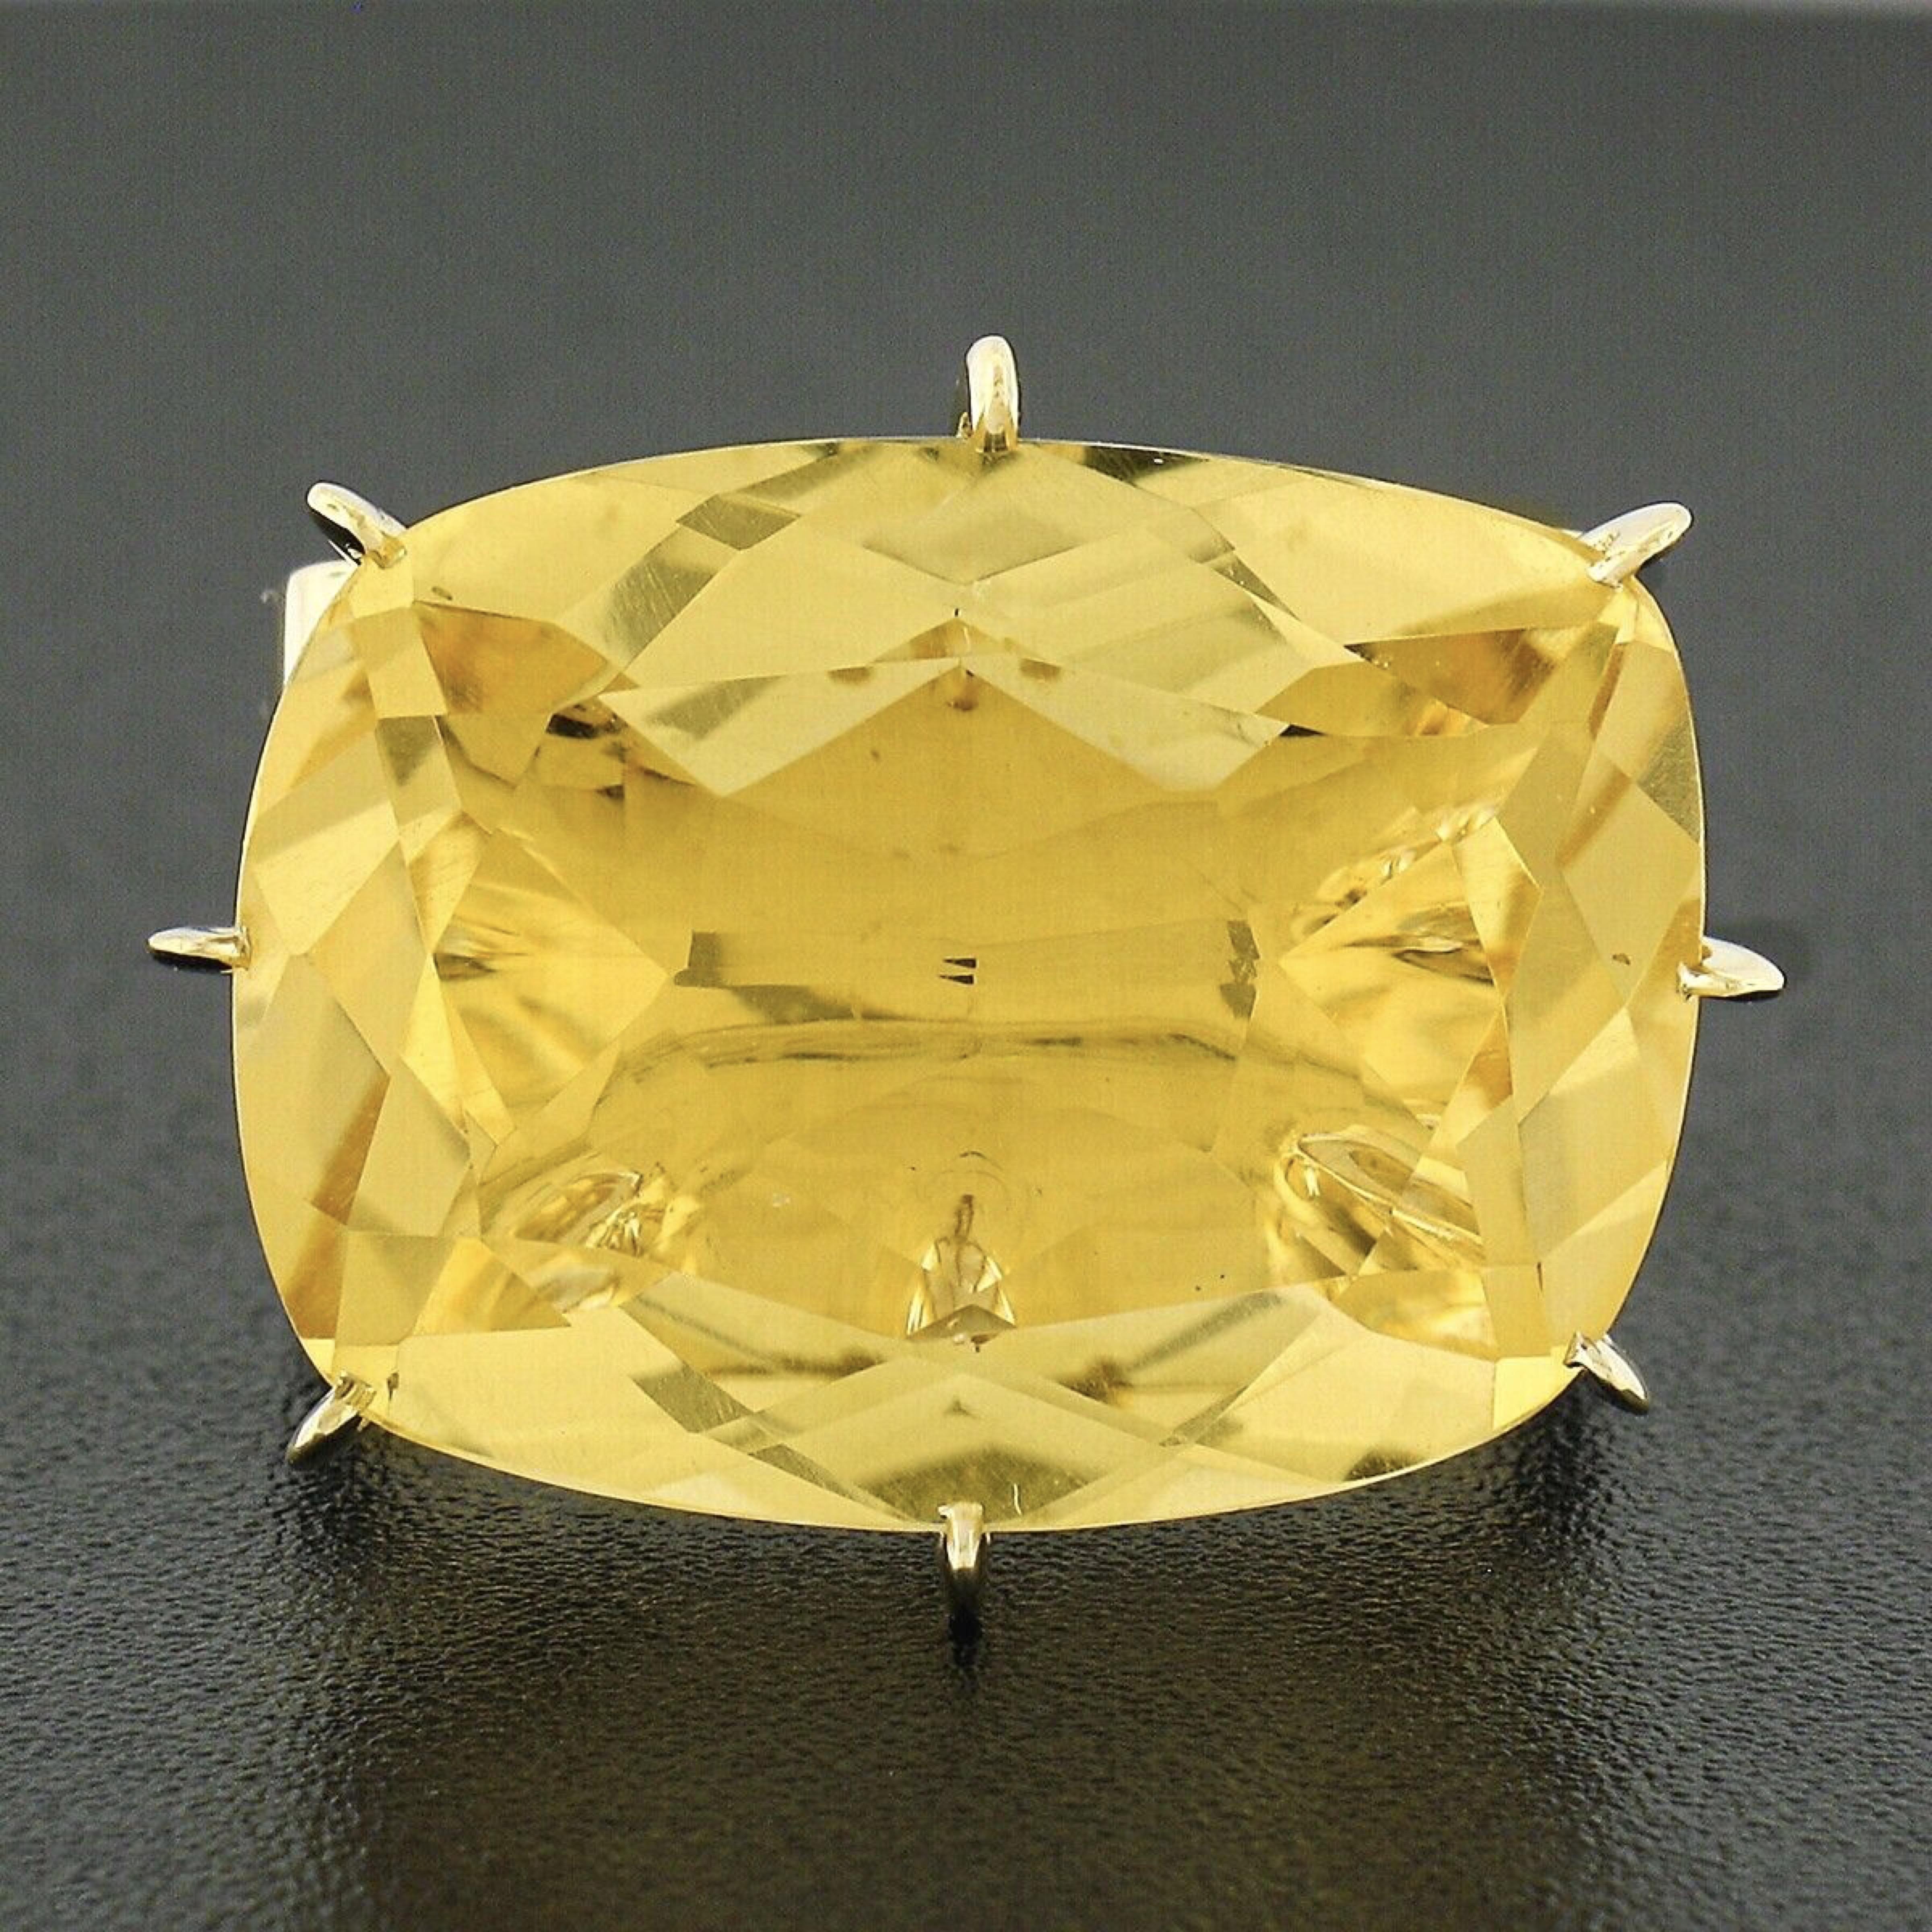 This gorgeous H. Stern cocktail ring was crafted in solid 18k yellow gold and features a large, approximately 12.50 carat, citrine that is neatly set with multiple prongs at its center. The solitaire has a cushion cut and displays a super fine